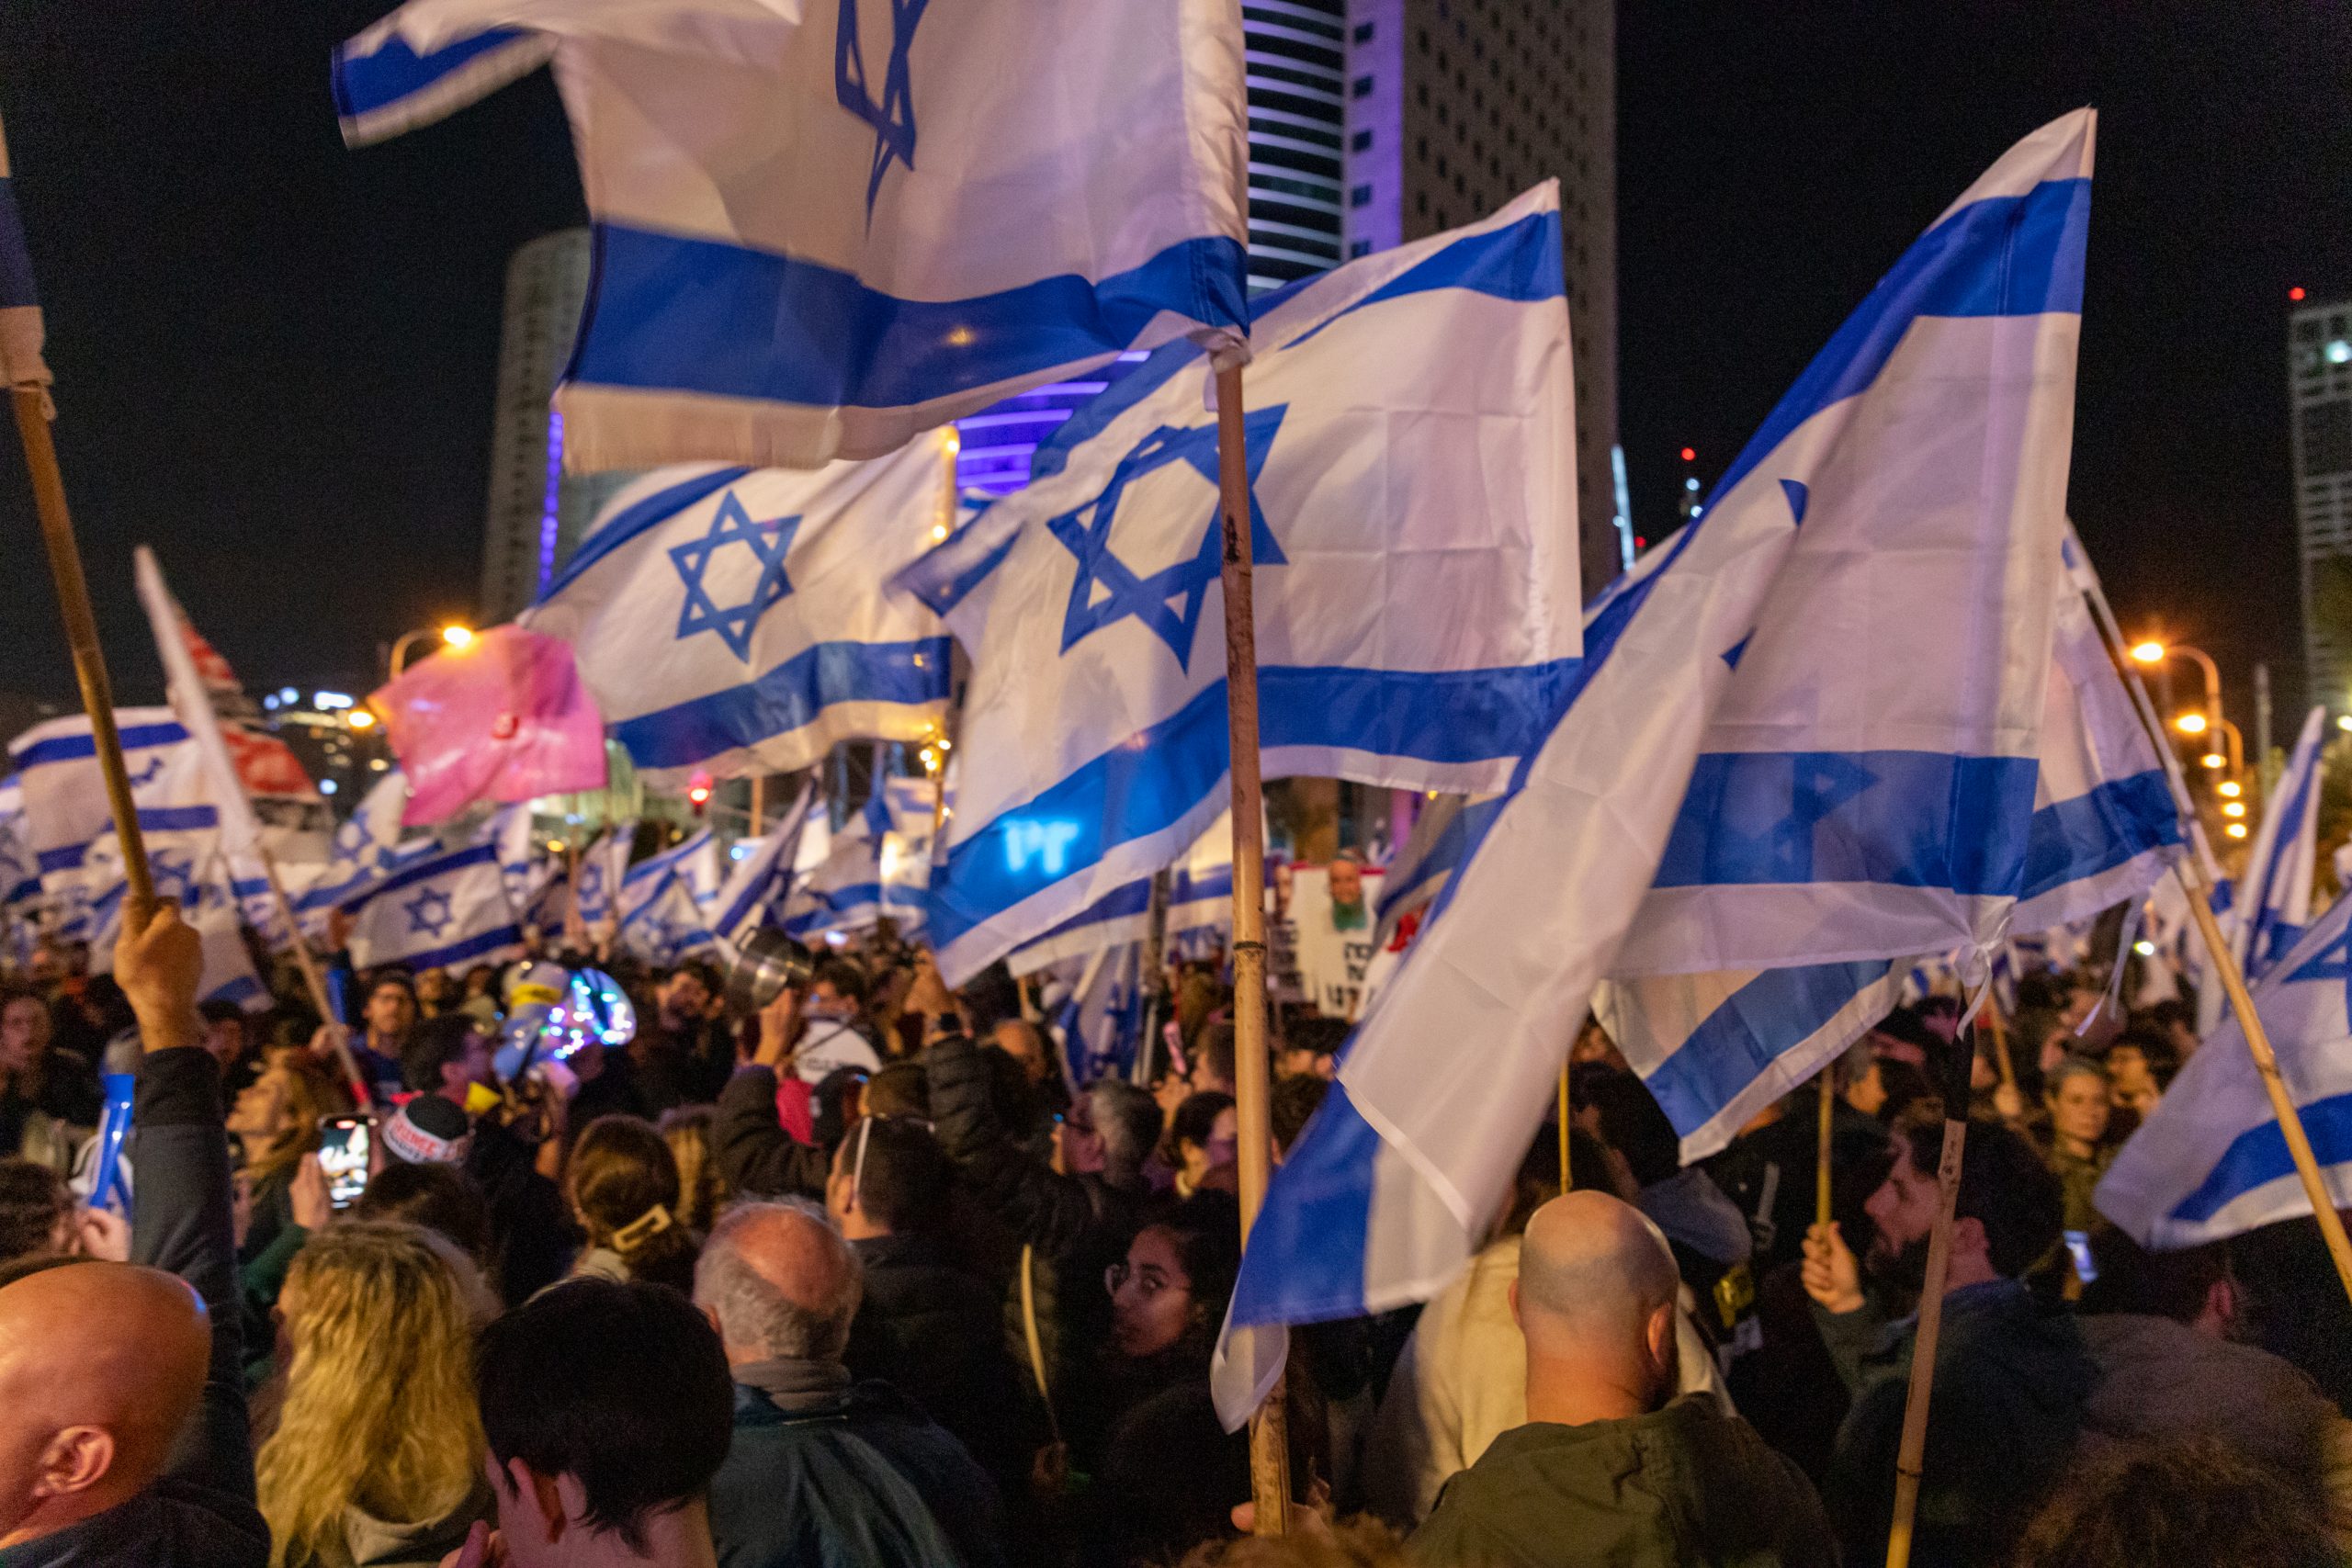 PRESS RELEASE: ‘Find Compromise; Maintain Unity And Civil Discourse,’American Jewish Congress Issues a Plea As Israel’s Judiciary Vote Draws A Global Audience